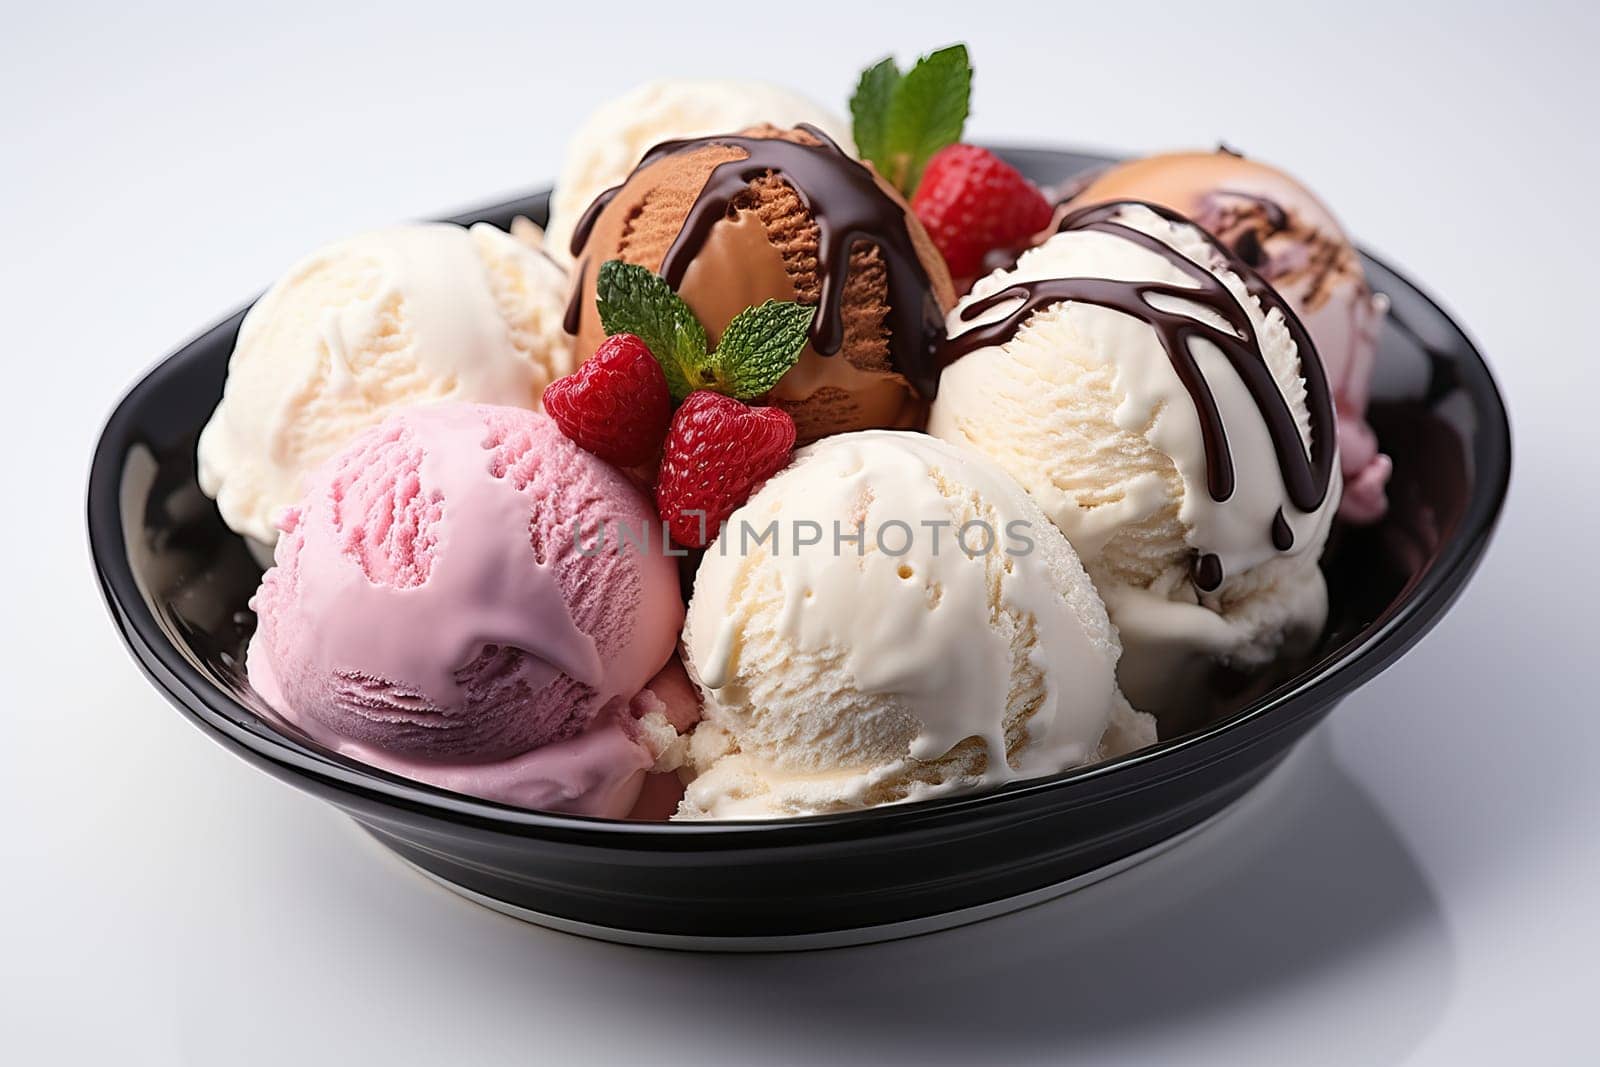 Scoops of vanilla, strawberry and chocolate ice cream in an ice cream bowl or ice cream in an ice cream bowl, colored ice cream scoops.